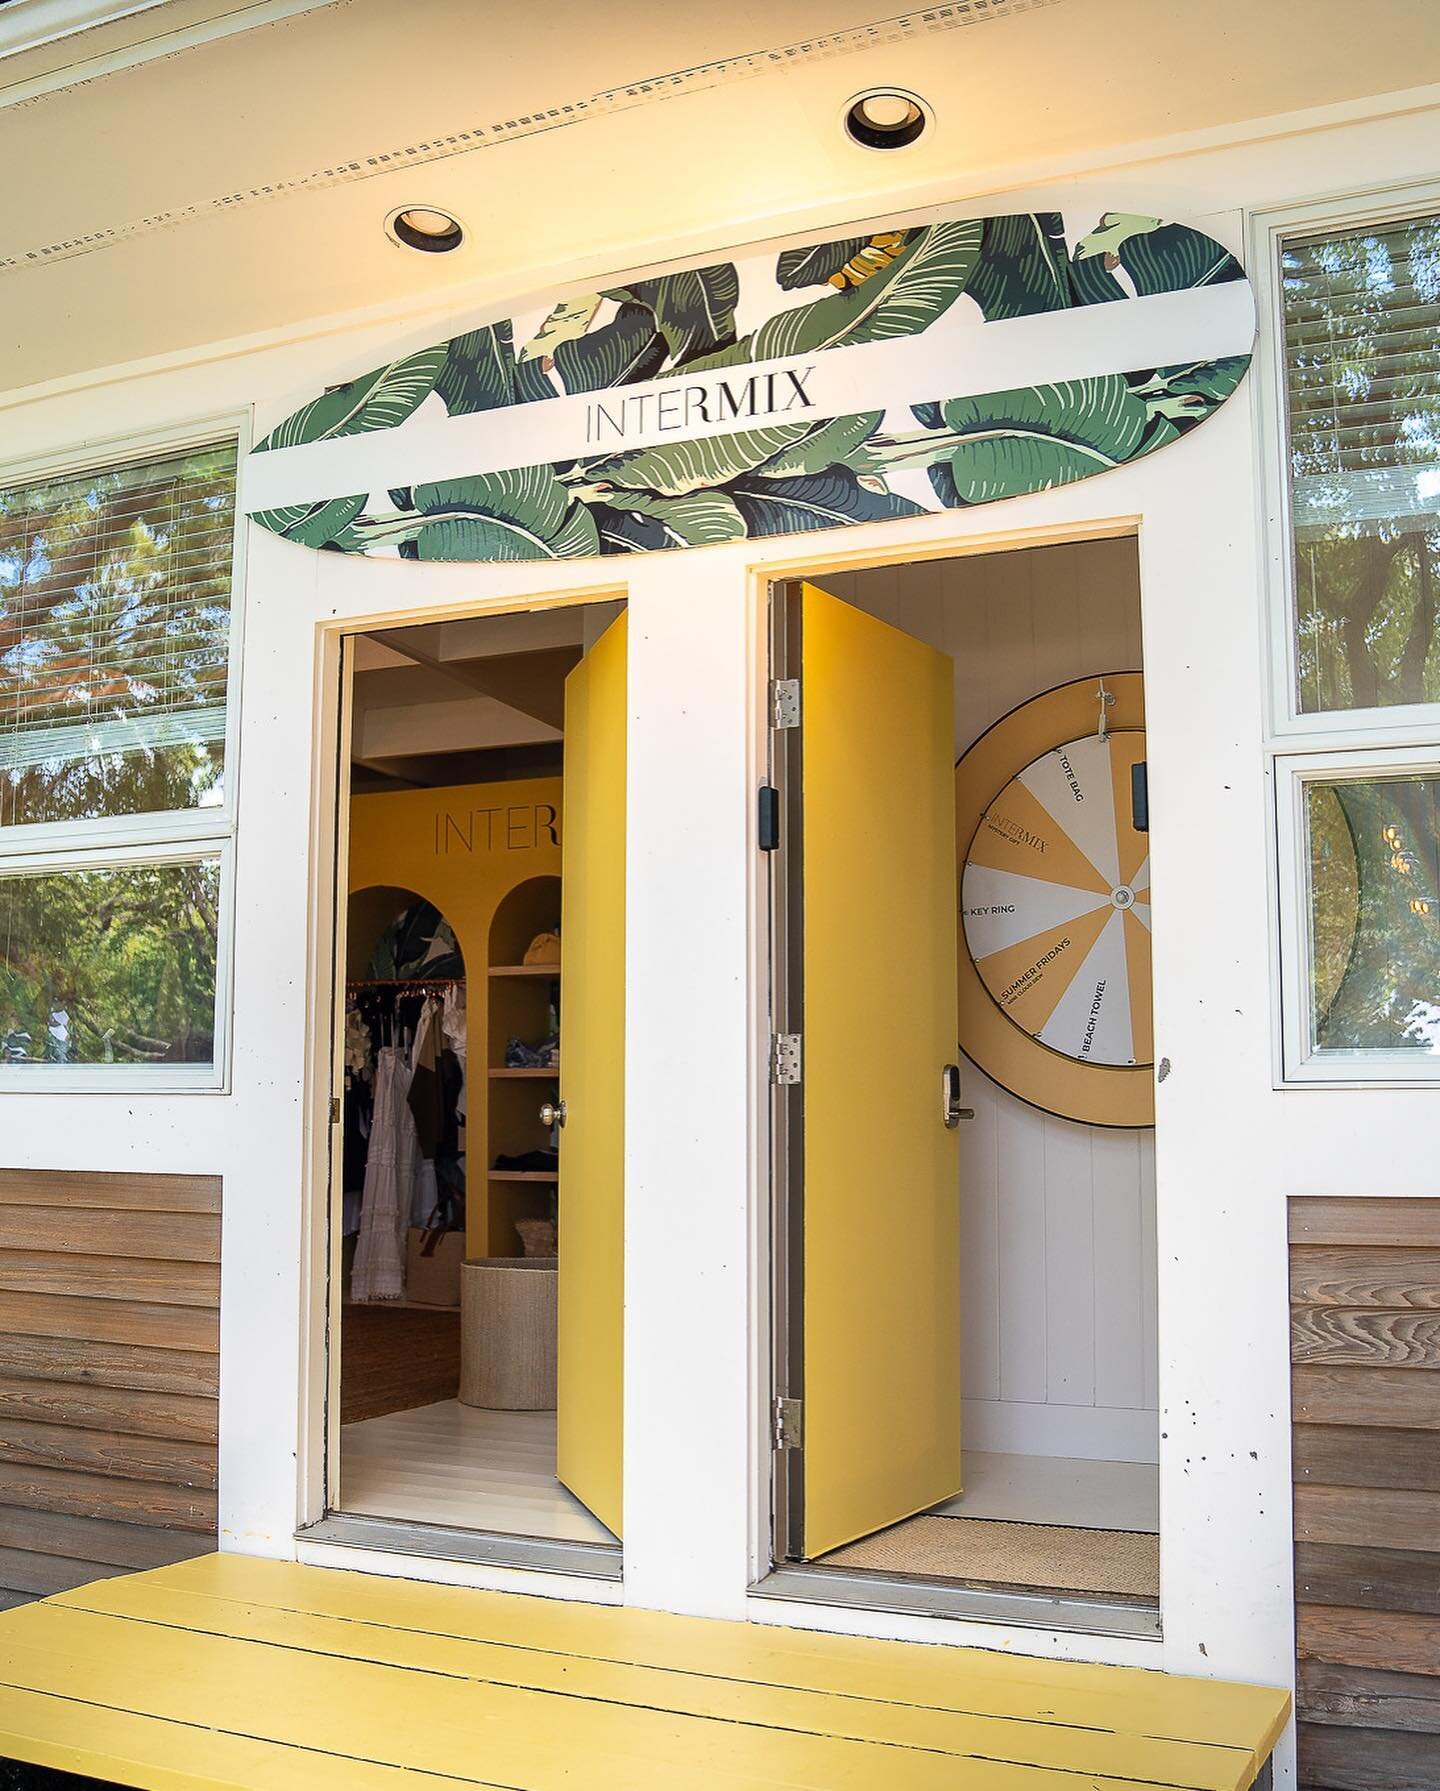 That&rsquo;s a wrap on INTERMIX in Montauk! Peep our &ldquo;Summer By INTERMIX&rdquo; pop-up shop and total @ruschmeyers takeover ⛱

From bungalow to boutique overnight, produced and operated by Butter. Complete with&hellip; 

The chicest out-east ed